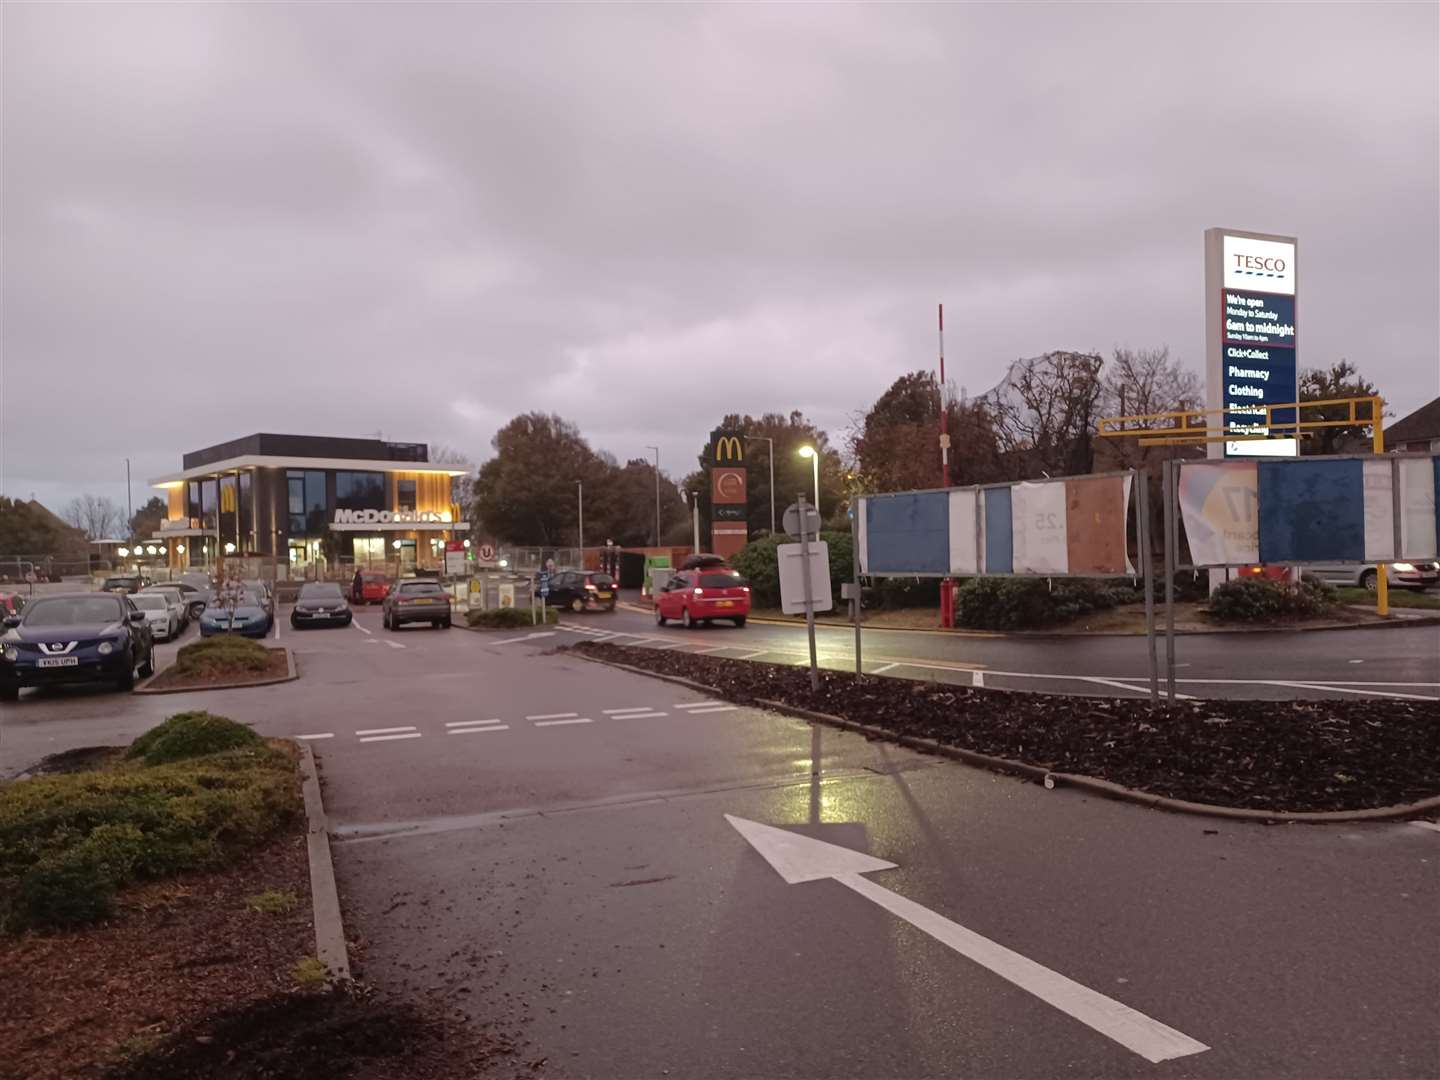 The new McDonald's is very much part of the Tesco site in Cheriton, Folkestone